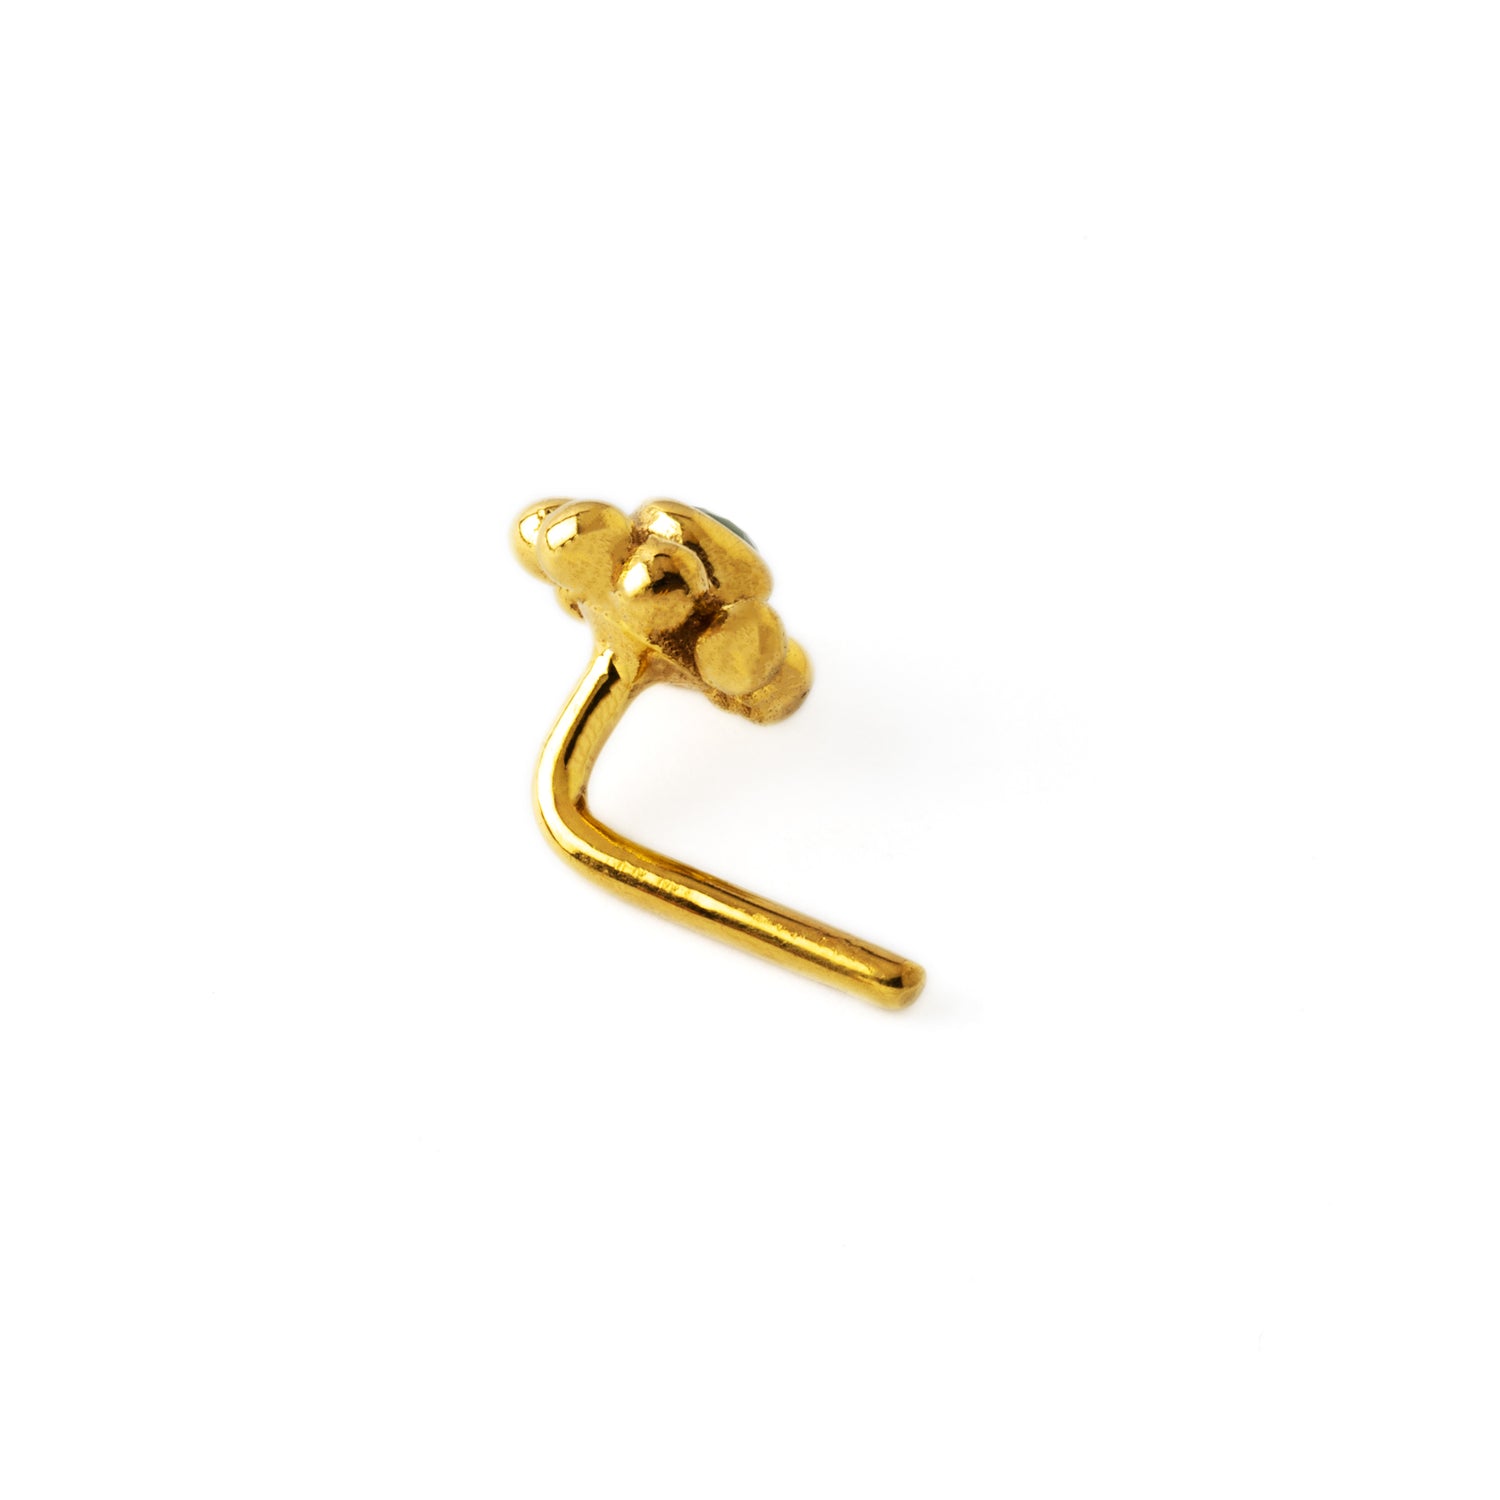 Gold Flower Nose Stud with Topaz back side view